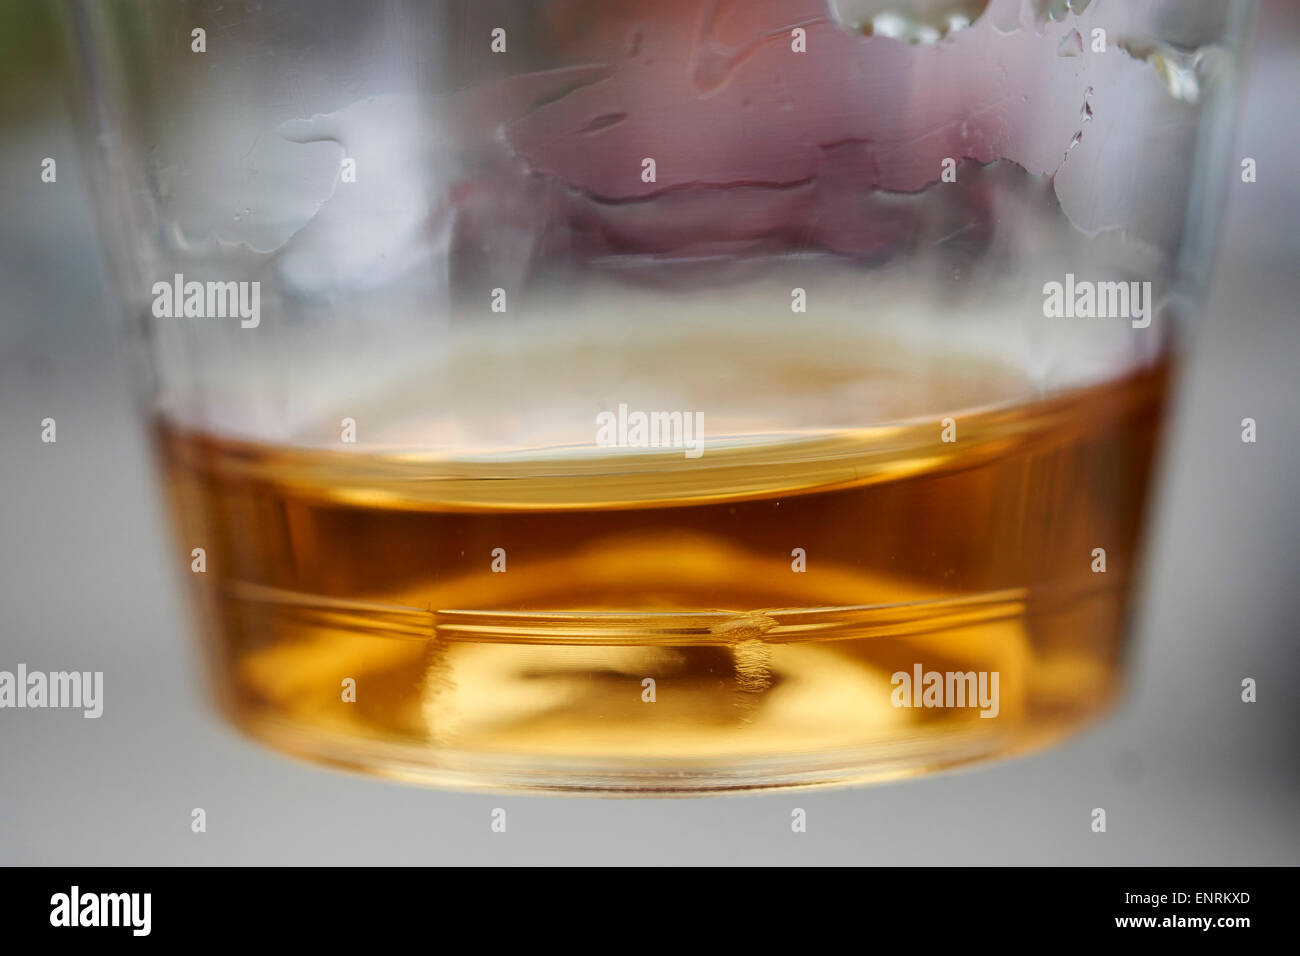 Whiskey sample in a plastic cup Stock Photo